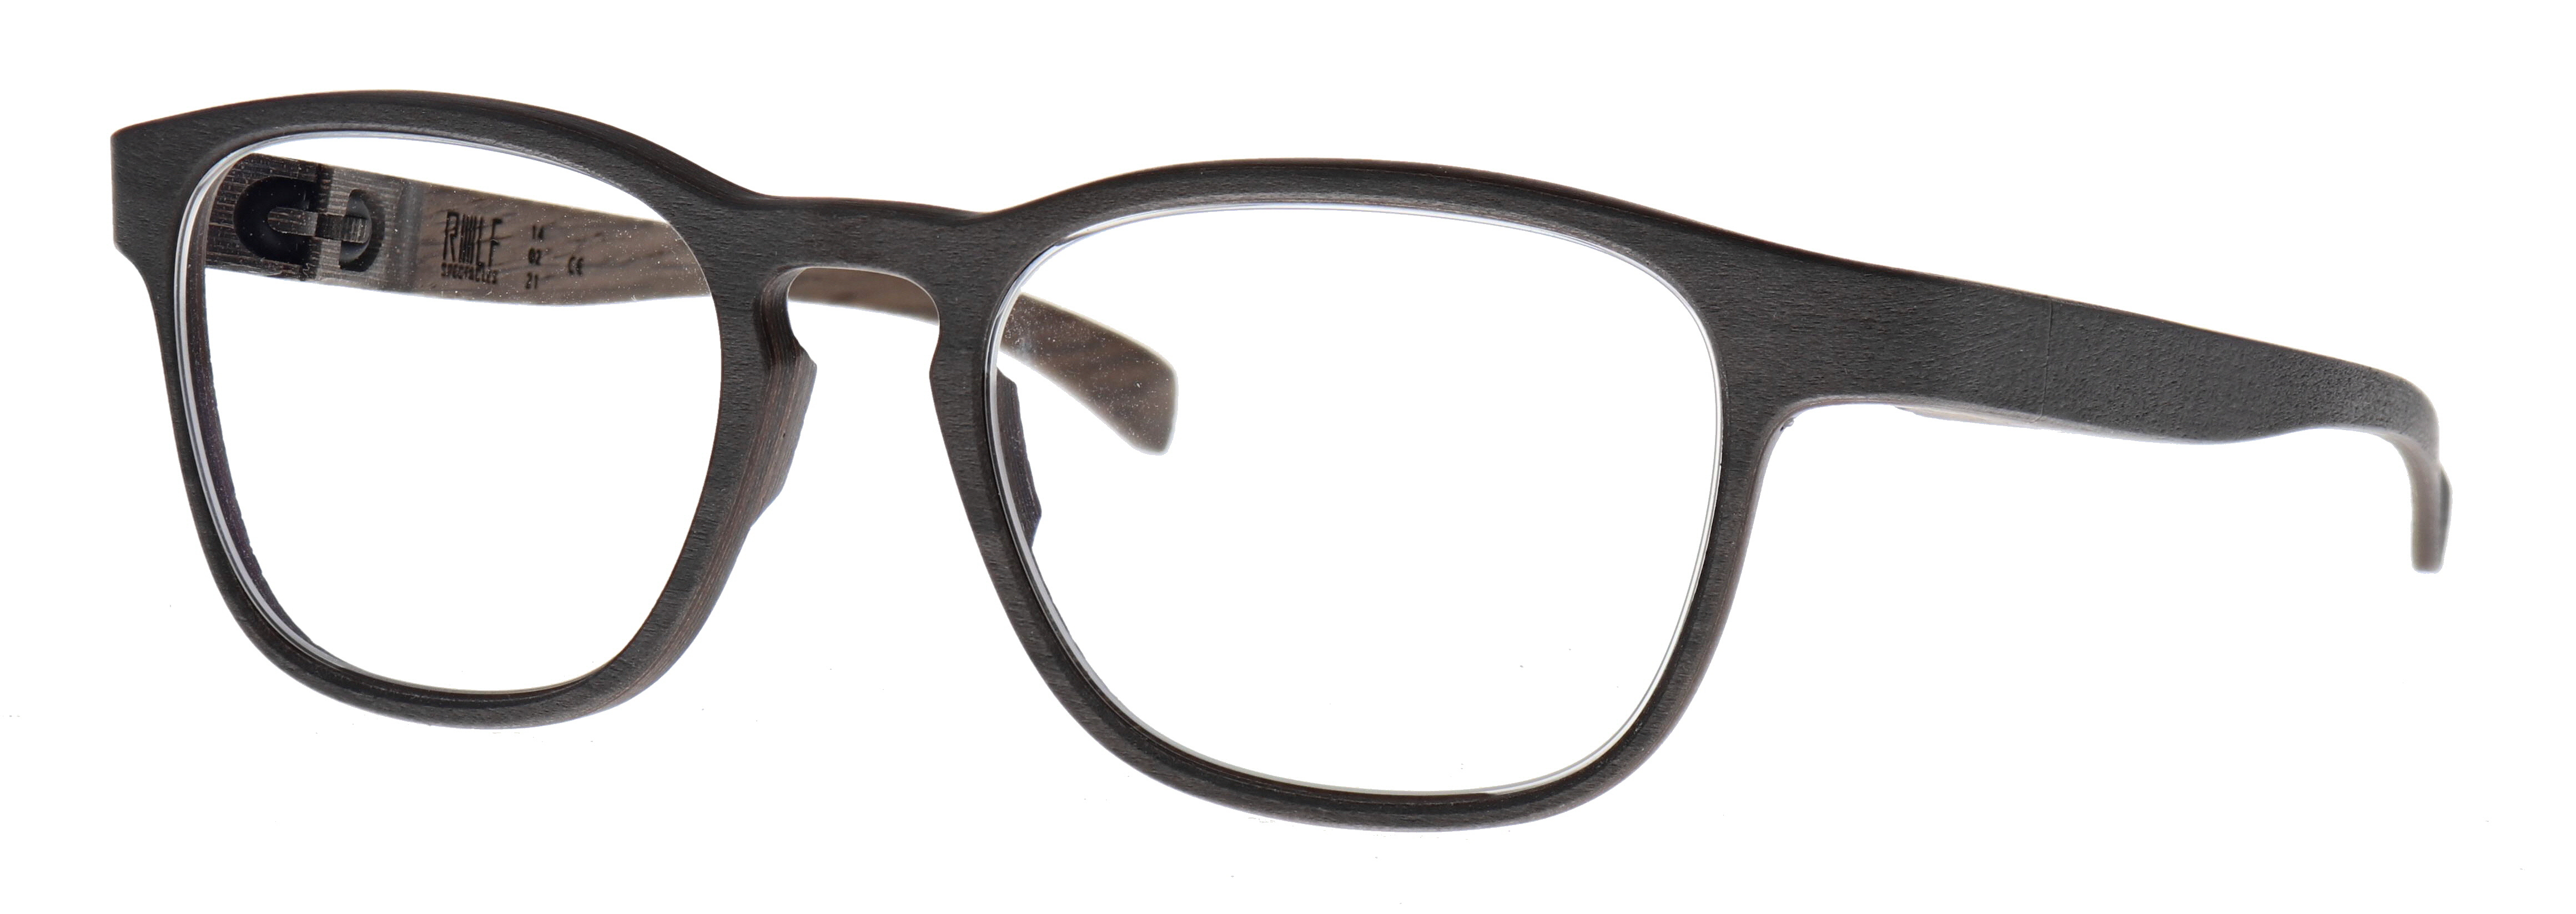 Rolf Spectacles Roadmaster